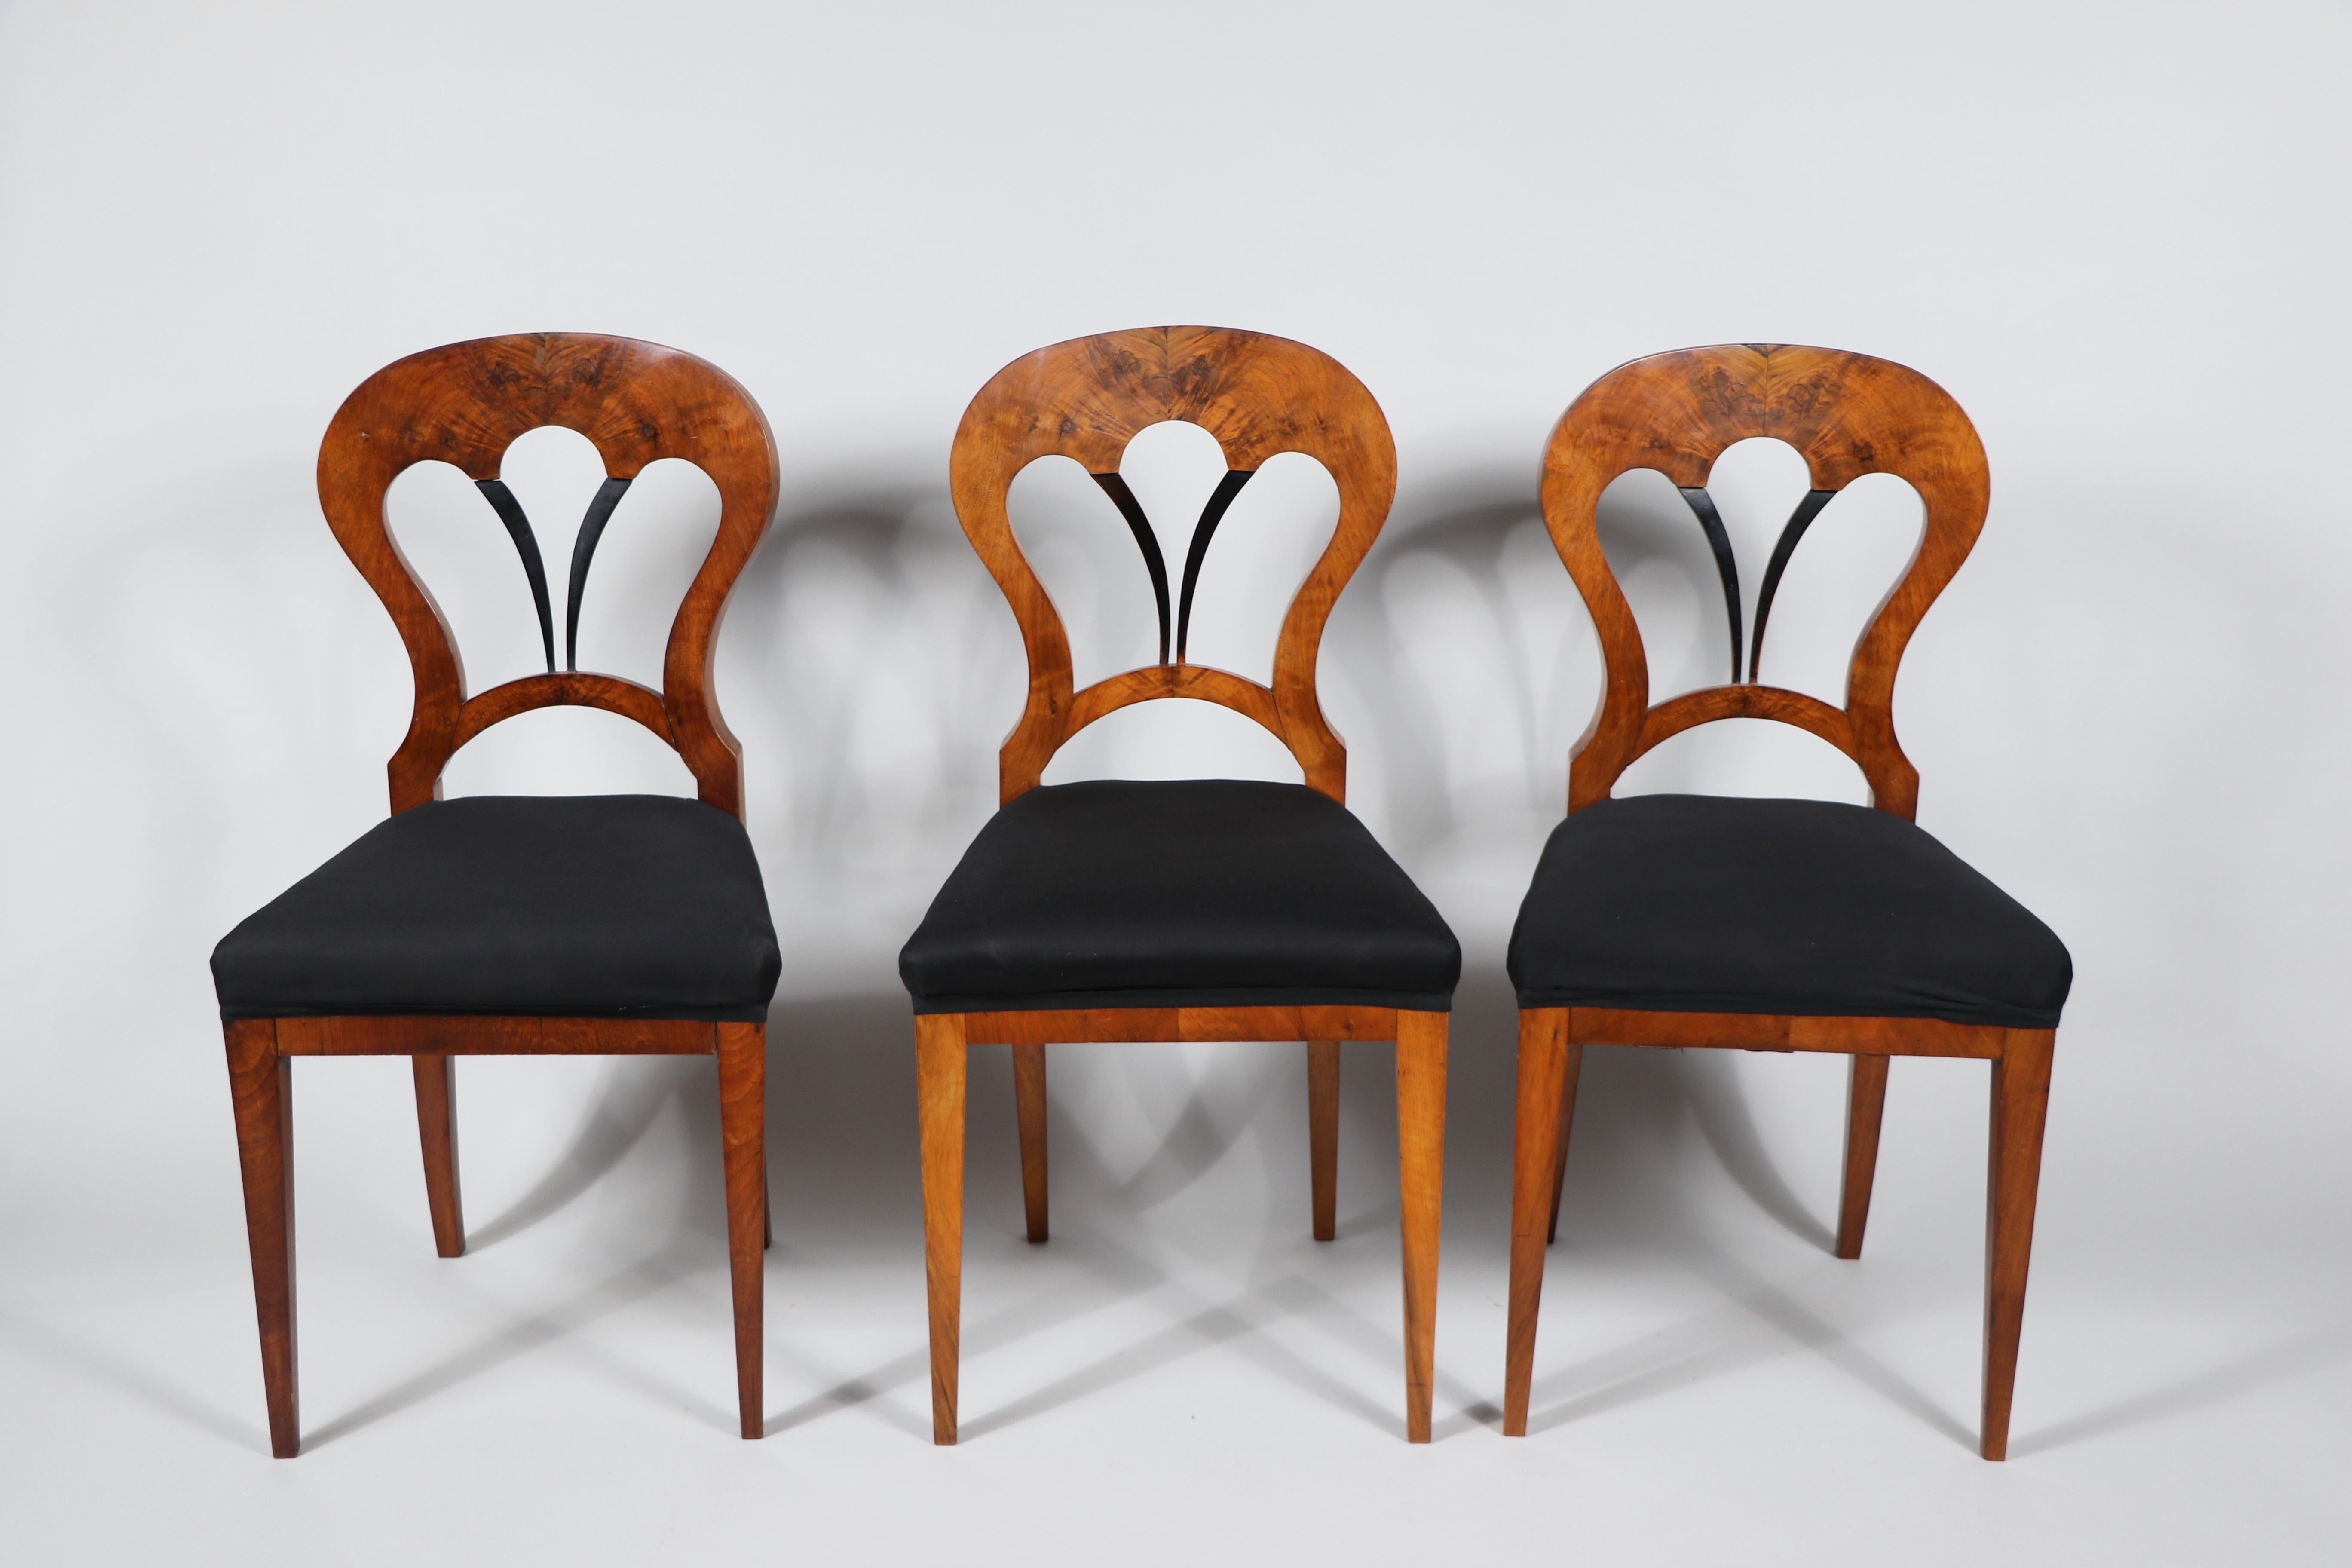 Upholstery 19th Century Biedermeier Set of Six Chairs & Table. Vienna, c. 1825. For Sale